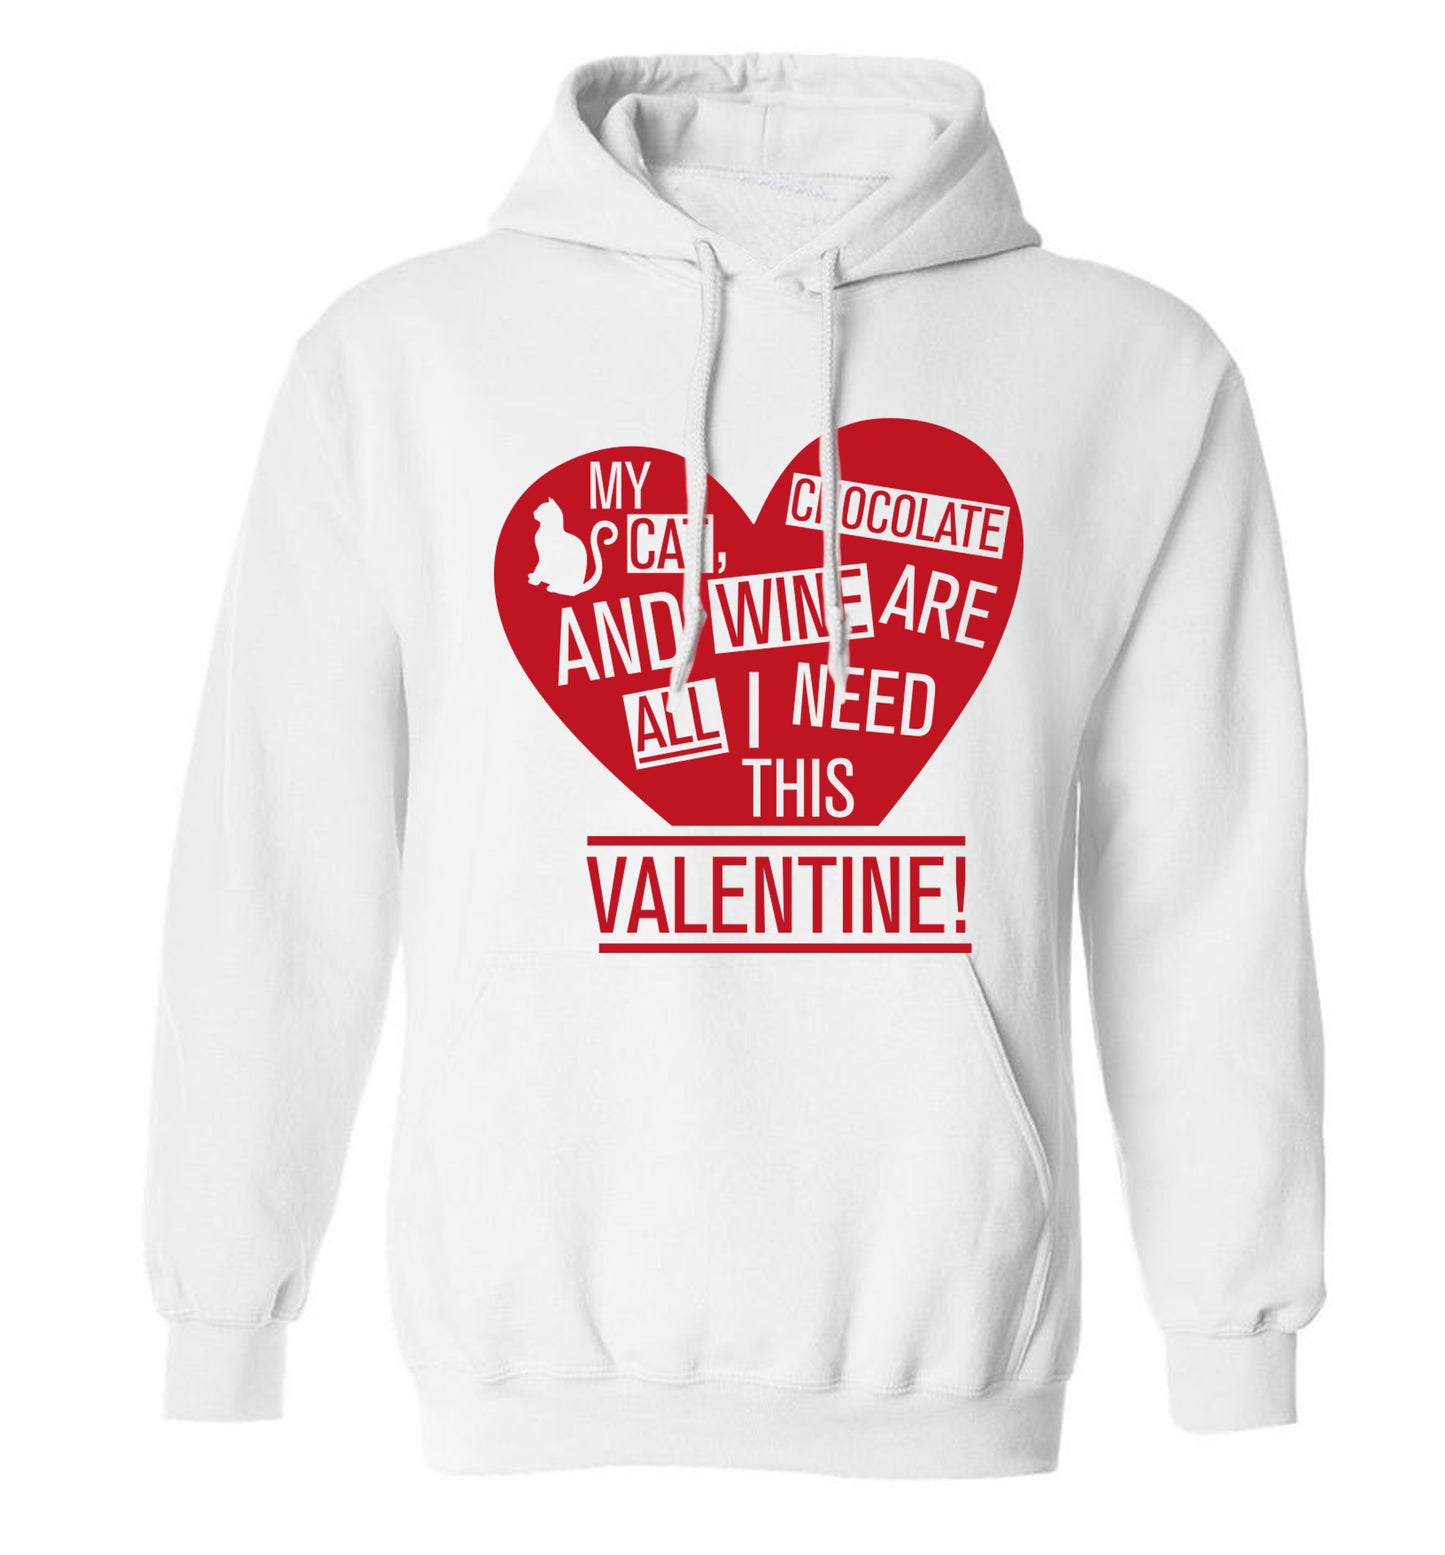 My cat, chocolate and wine are all I need this valentine! adults unisex white hoodie 2XL